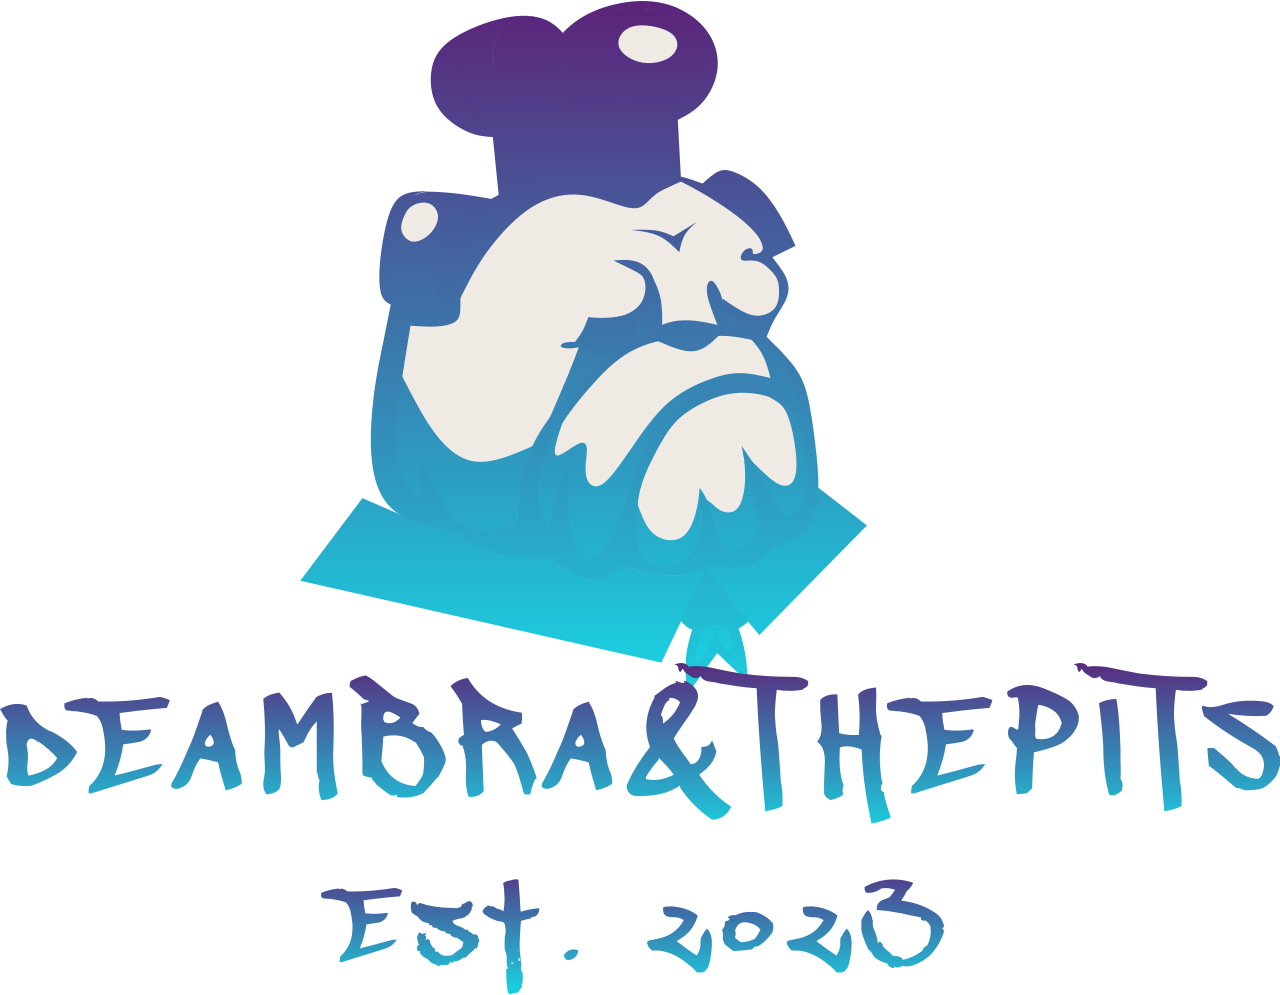 DeAmbra&ThePits's logo